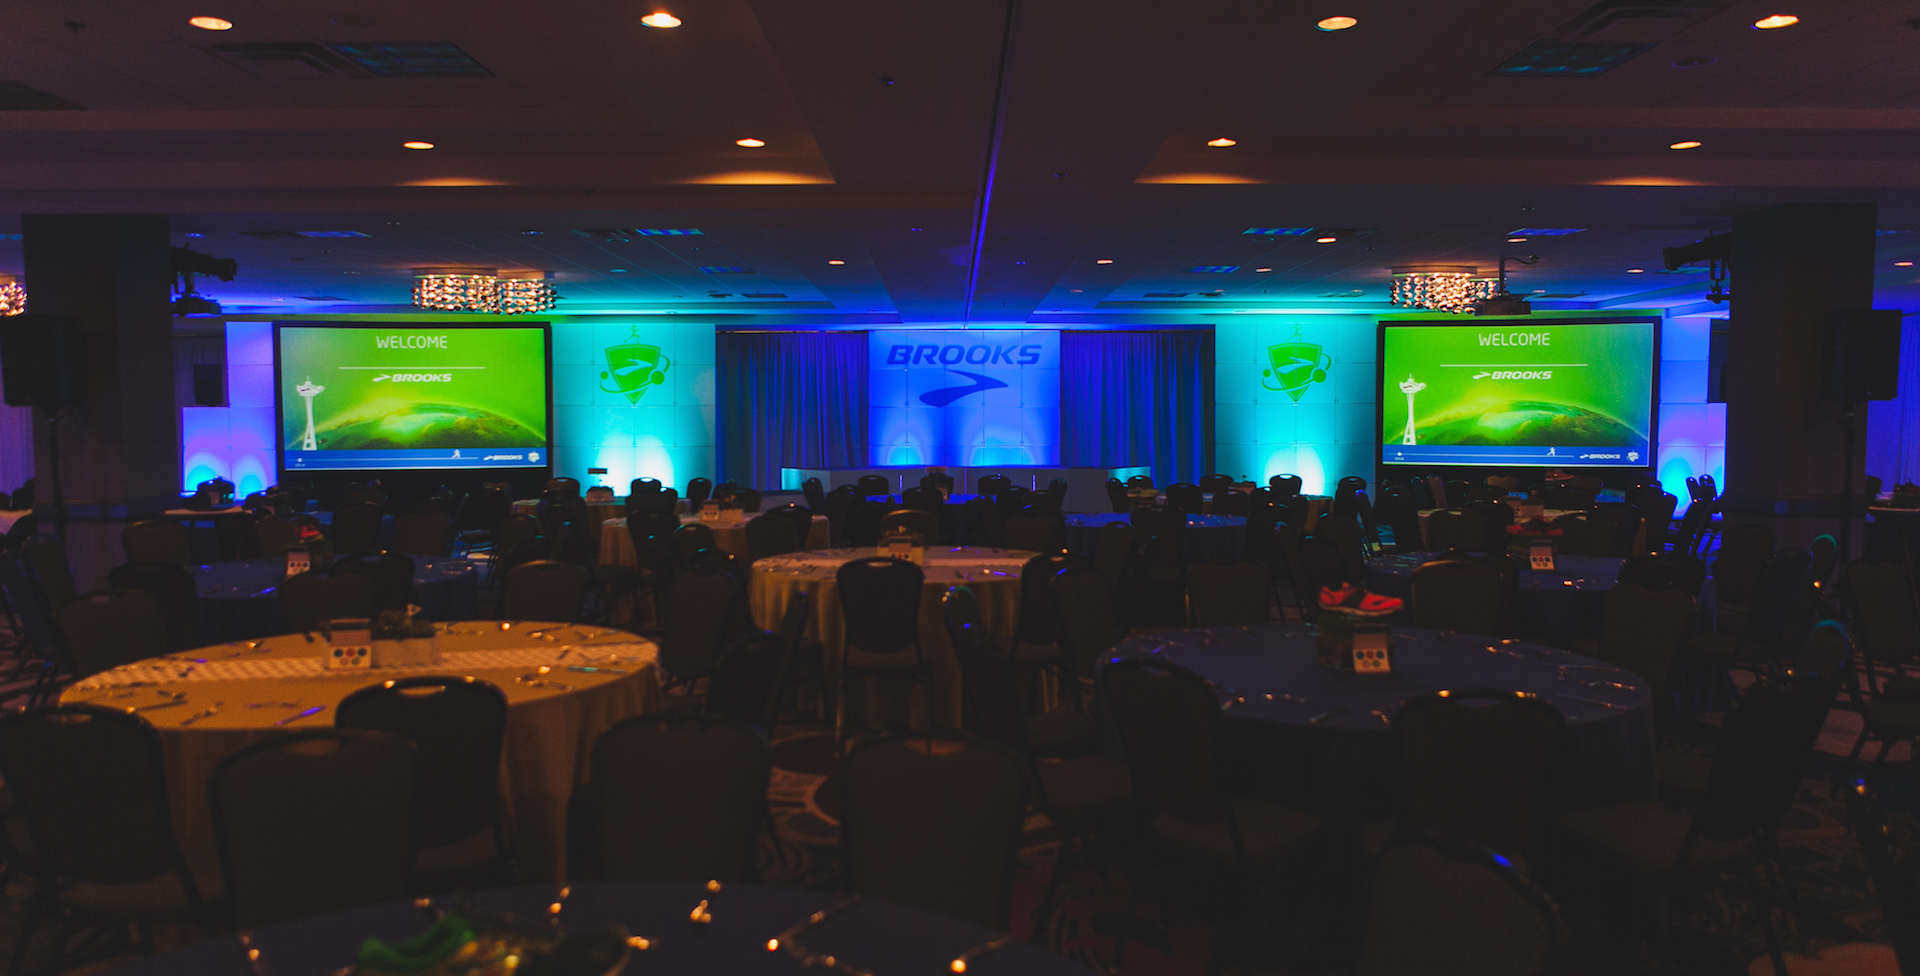 Two big screens dispalying logos are on either side of a stage for a corporate event. There is blue and green lighting and an impressive atmosphere.